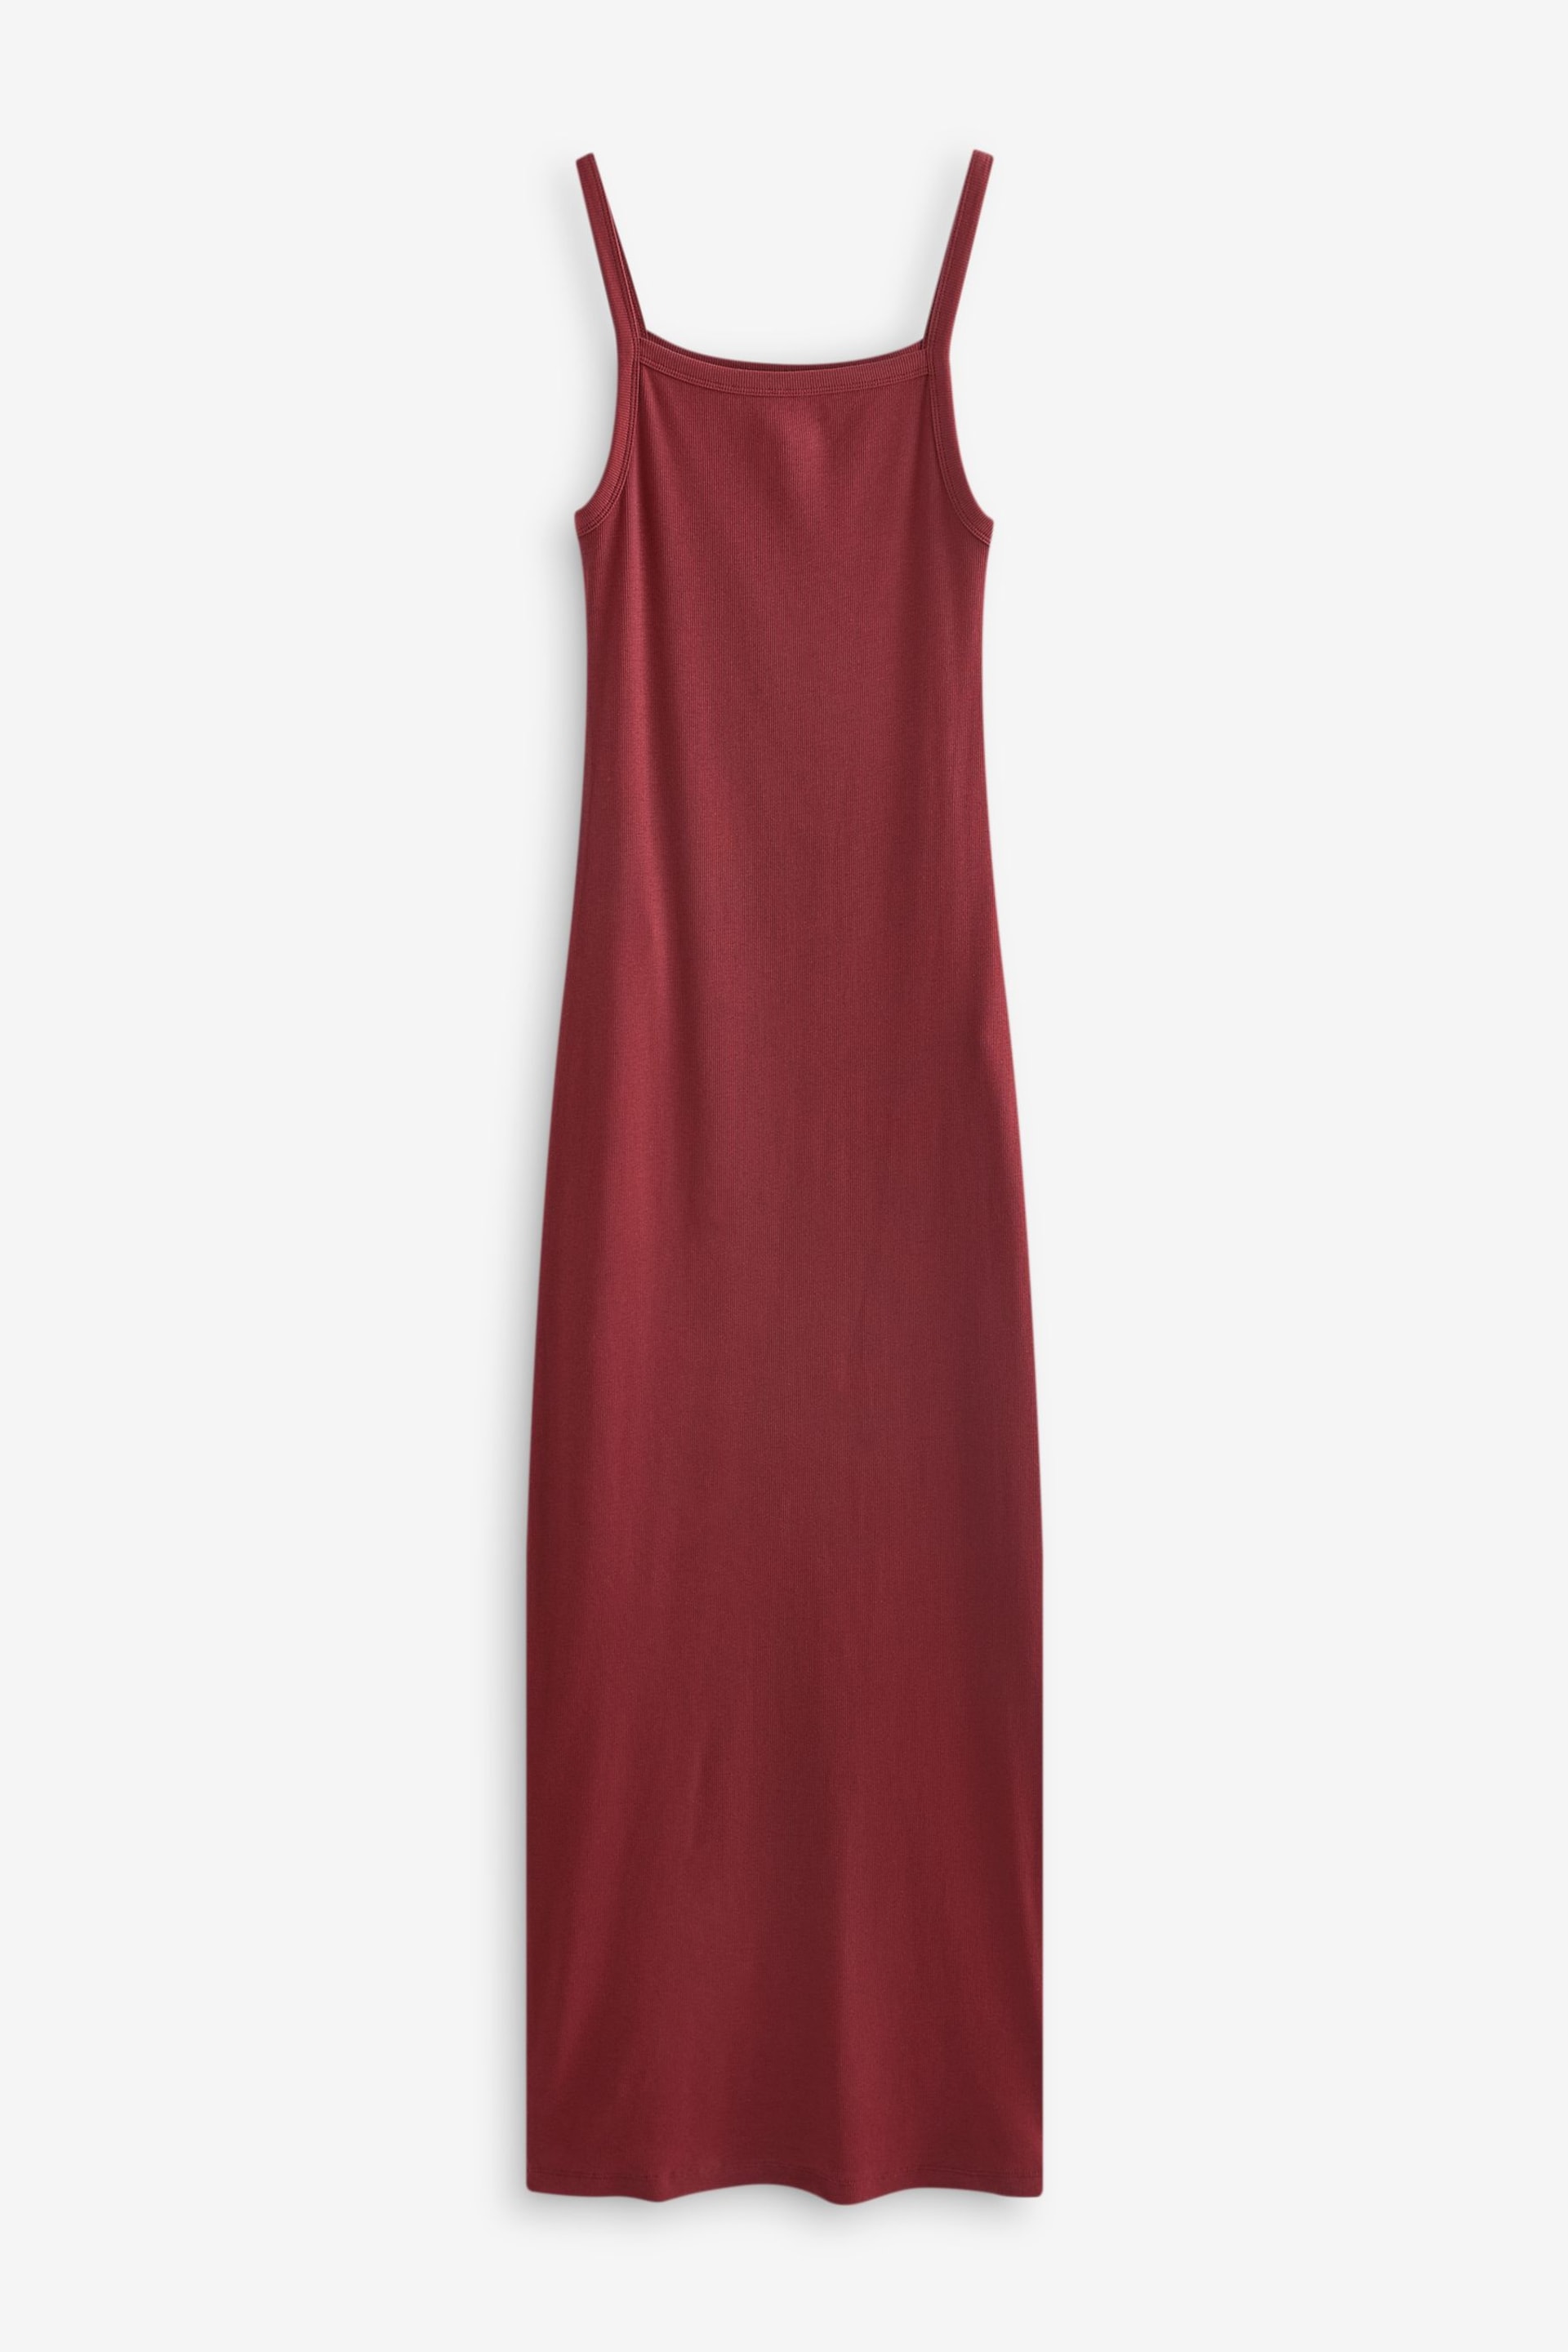 Red Strappy Ribbed Maxi Dress - Image 5 of 6